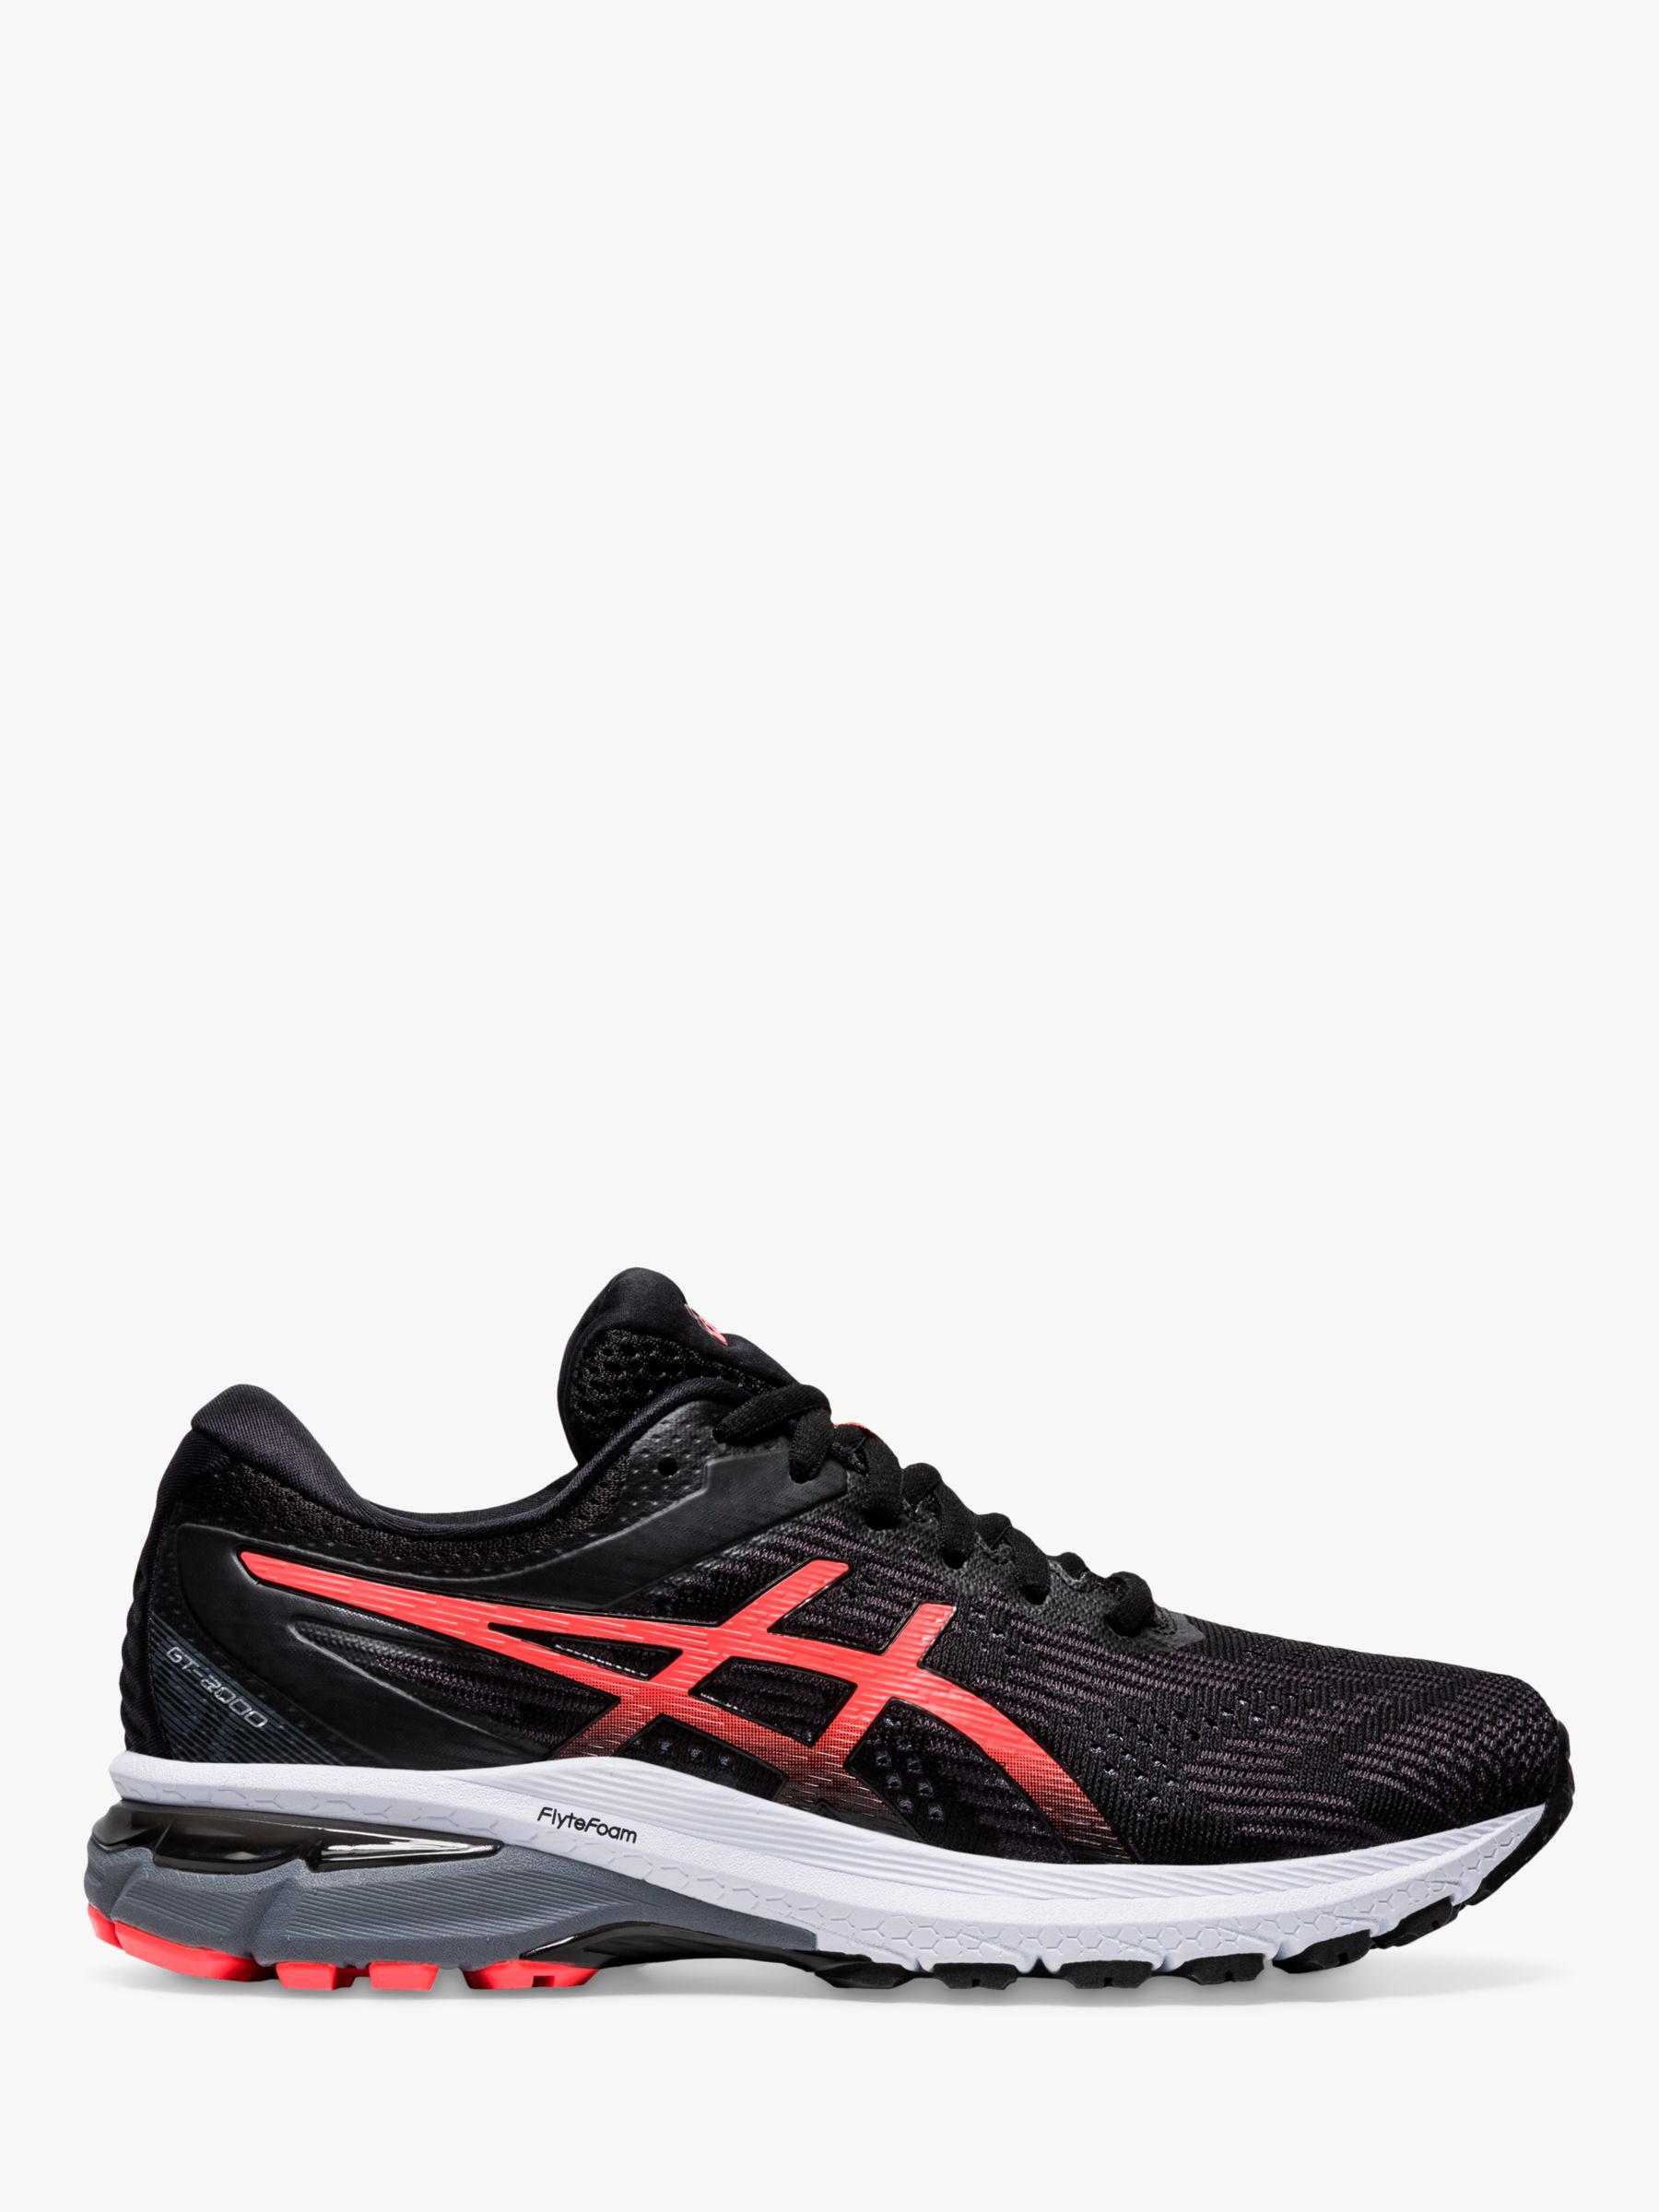 womens red asics running shoes